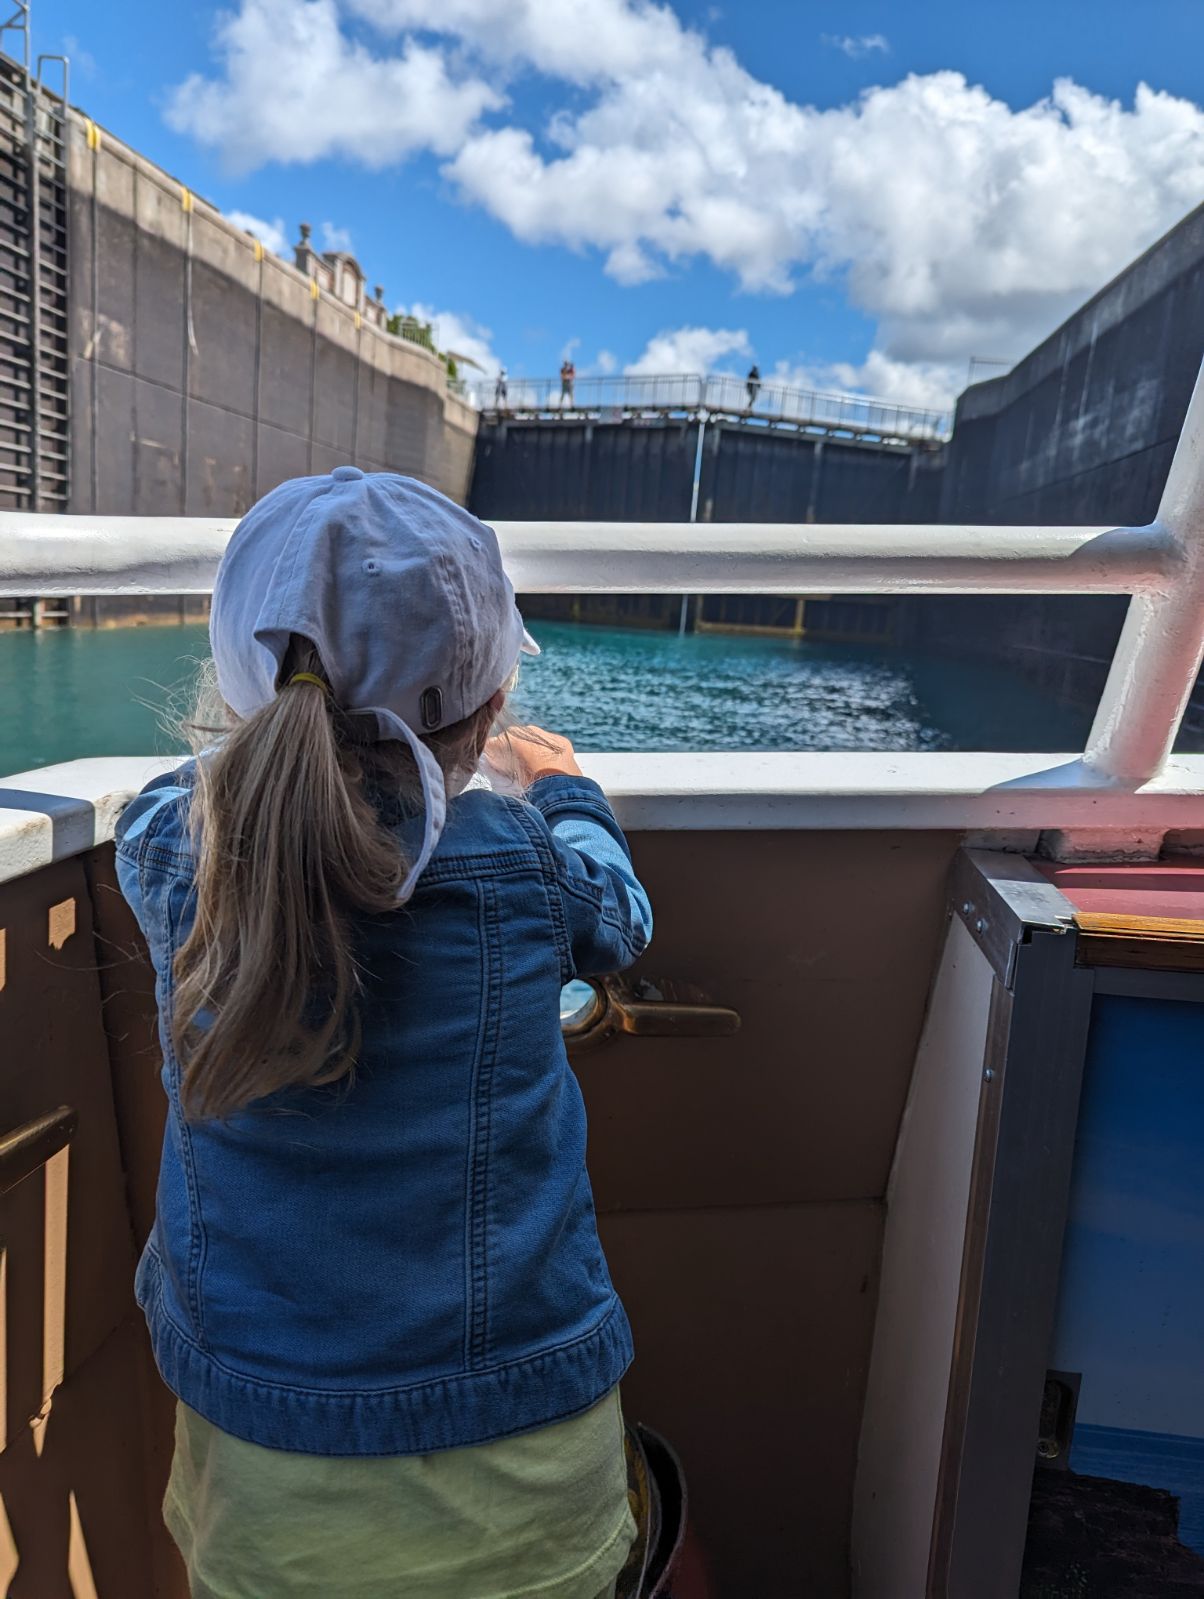 A small girl looking over the metal railing of a ship as it enters the Sault Locks, filled with shining blue-green water under a blue sky.